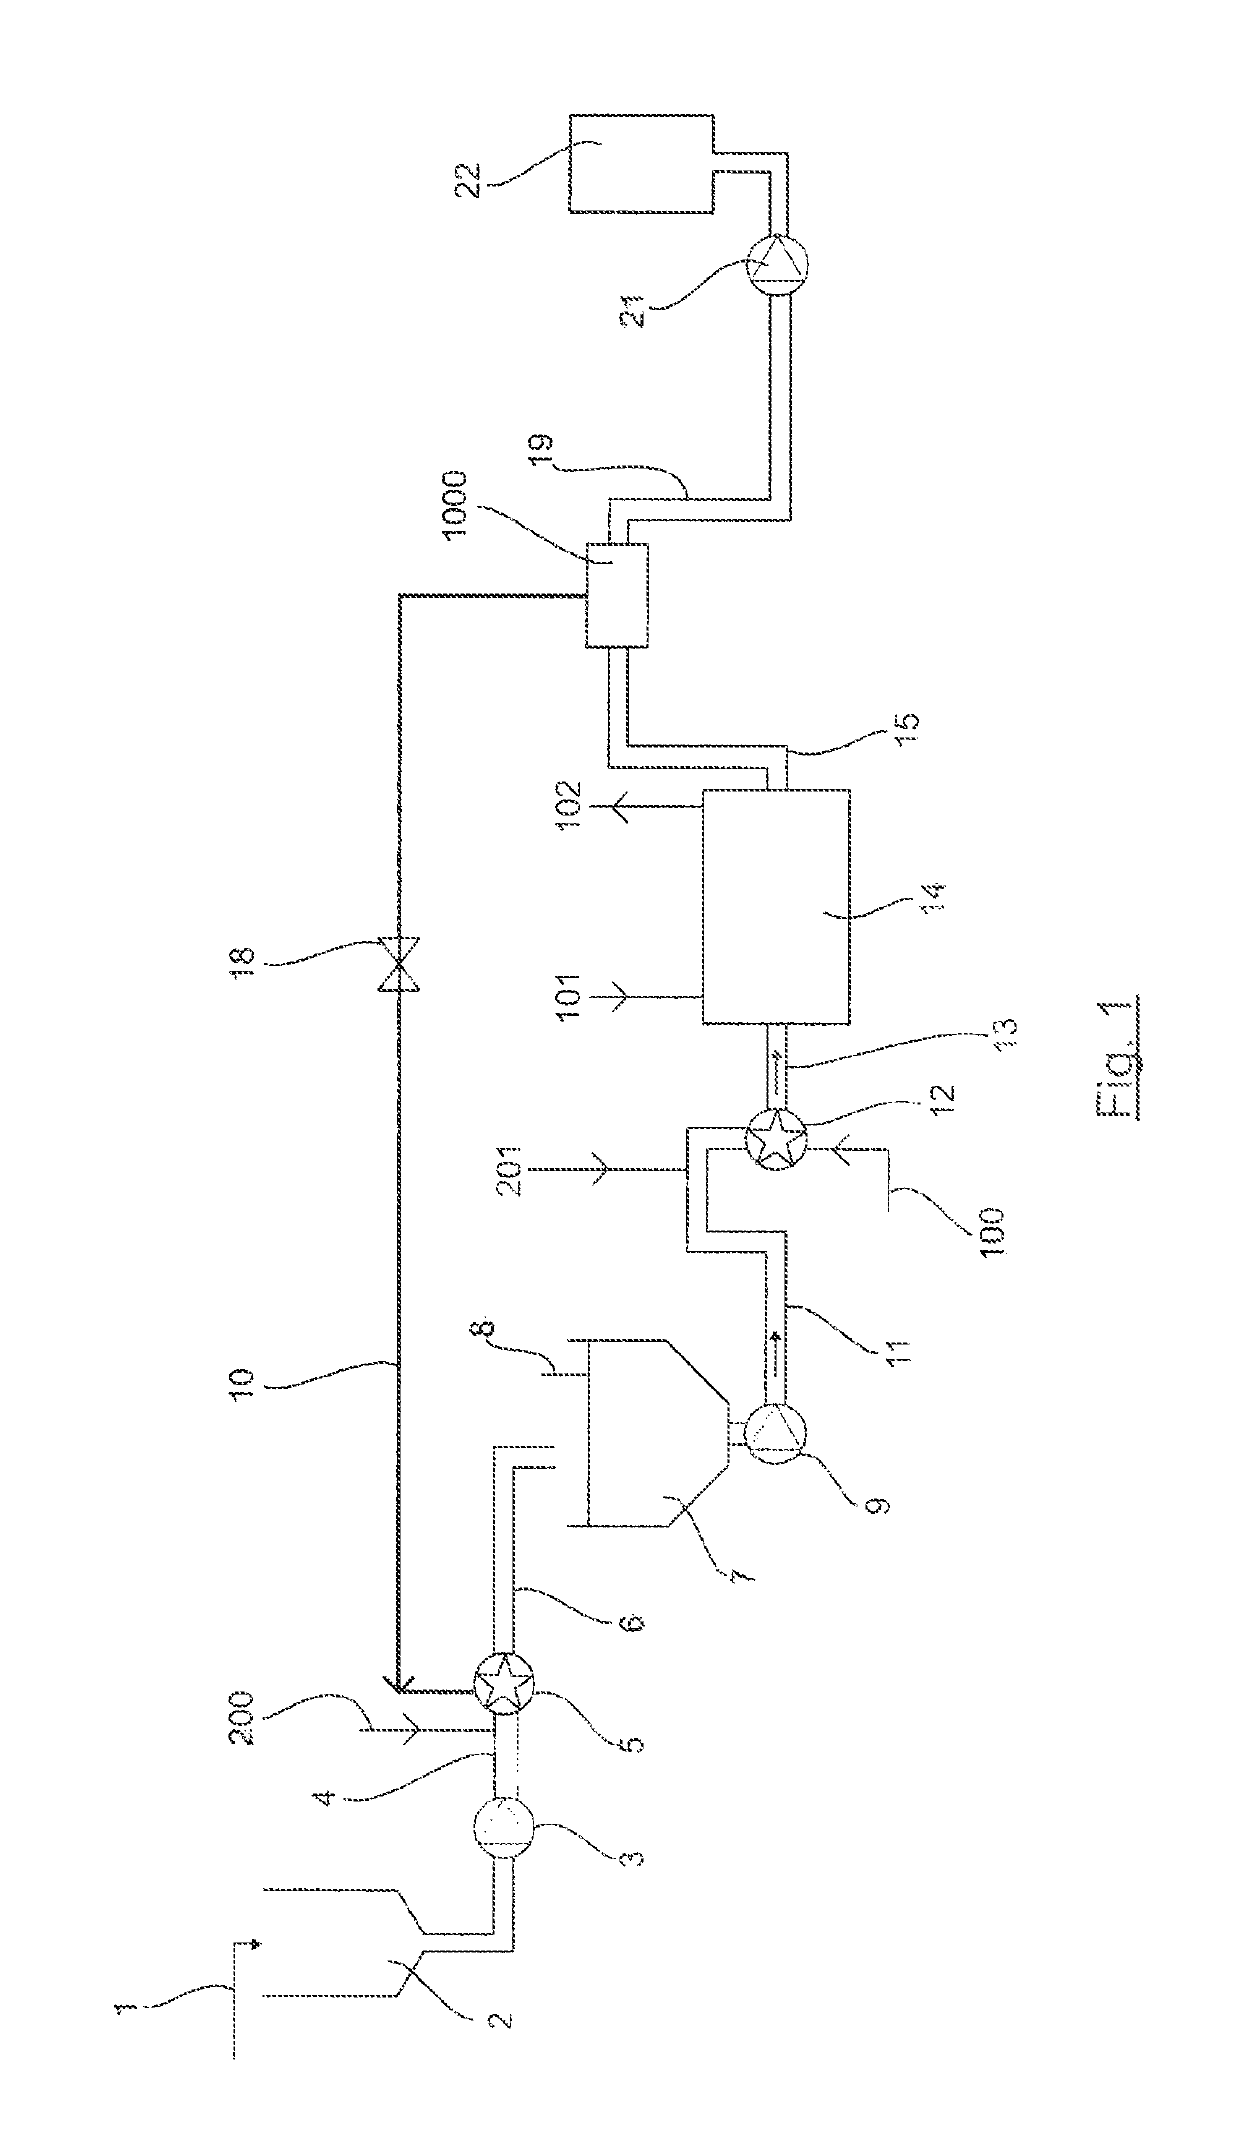 Method for continuous thermal hydrolysis with recirculation of recovered steam